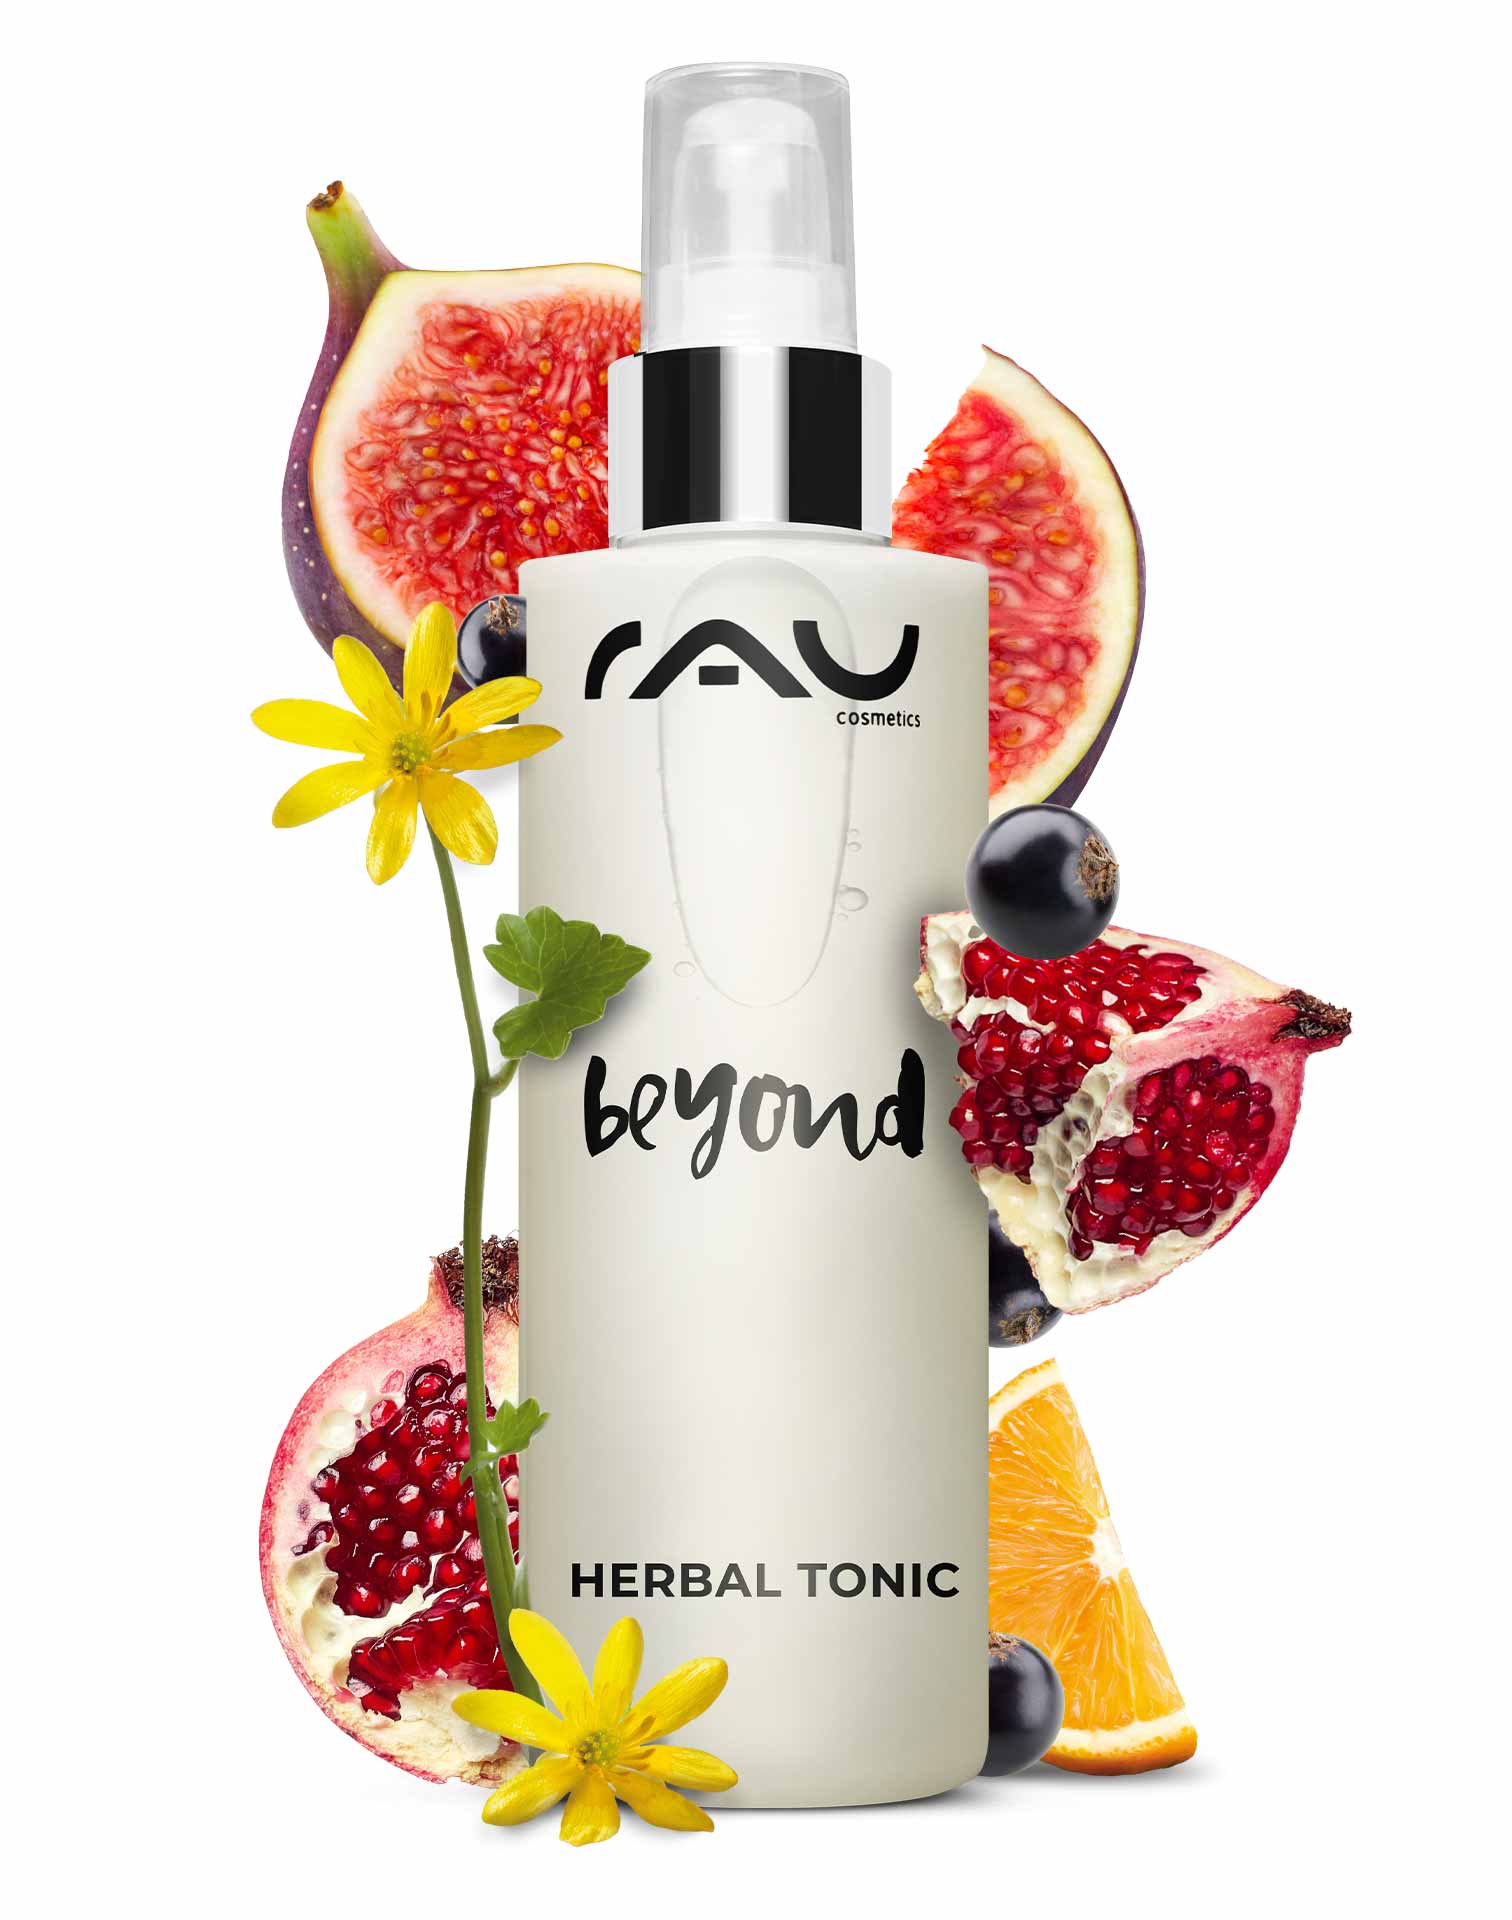 RAU beyond Herbal Tonic 200 ml - Gentle Facial Toner out of the Best of Nature